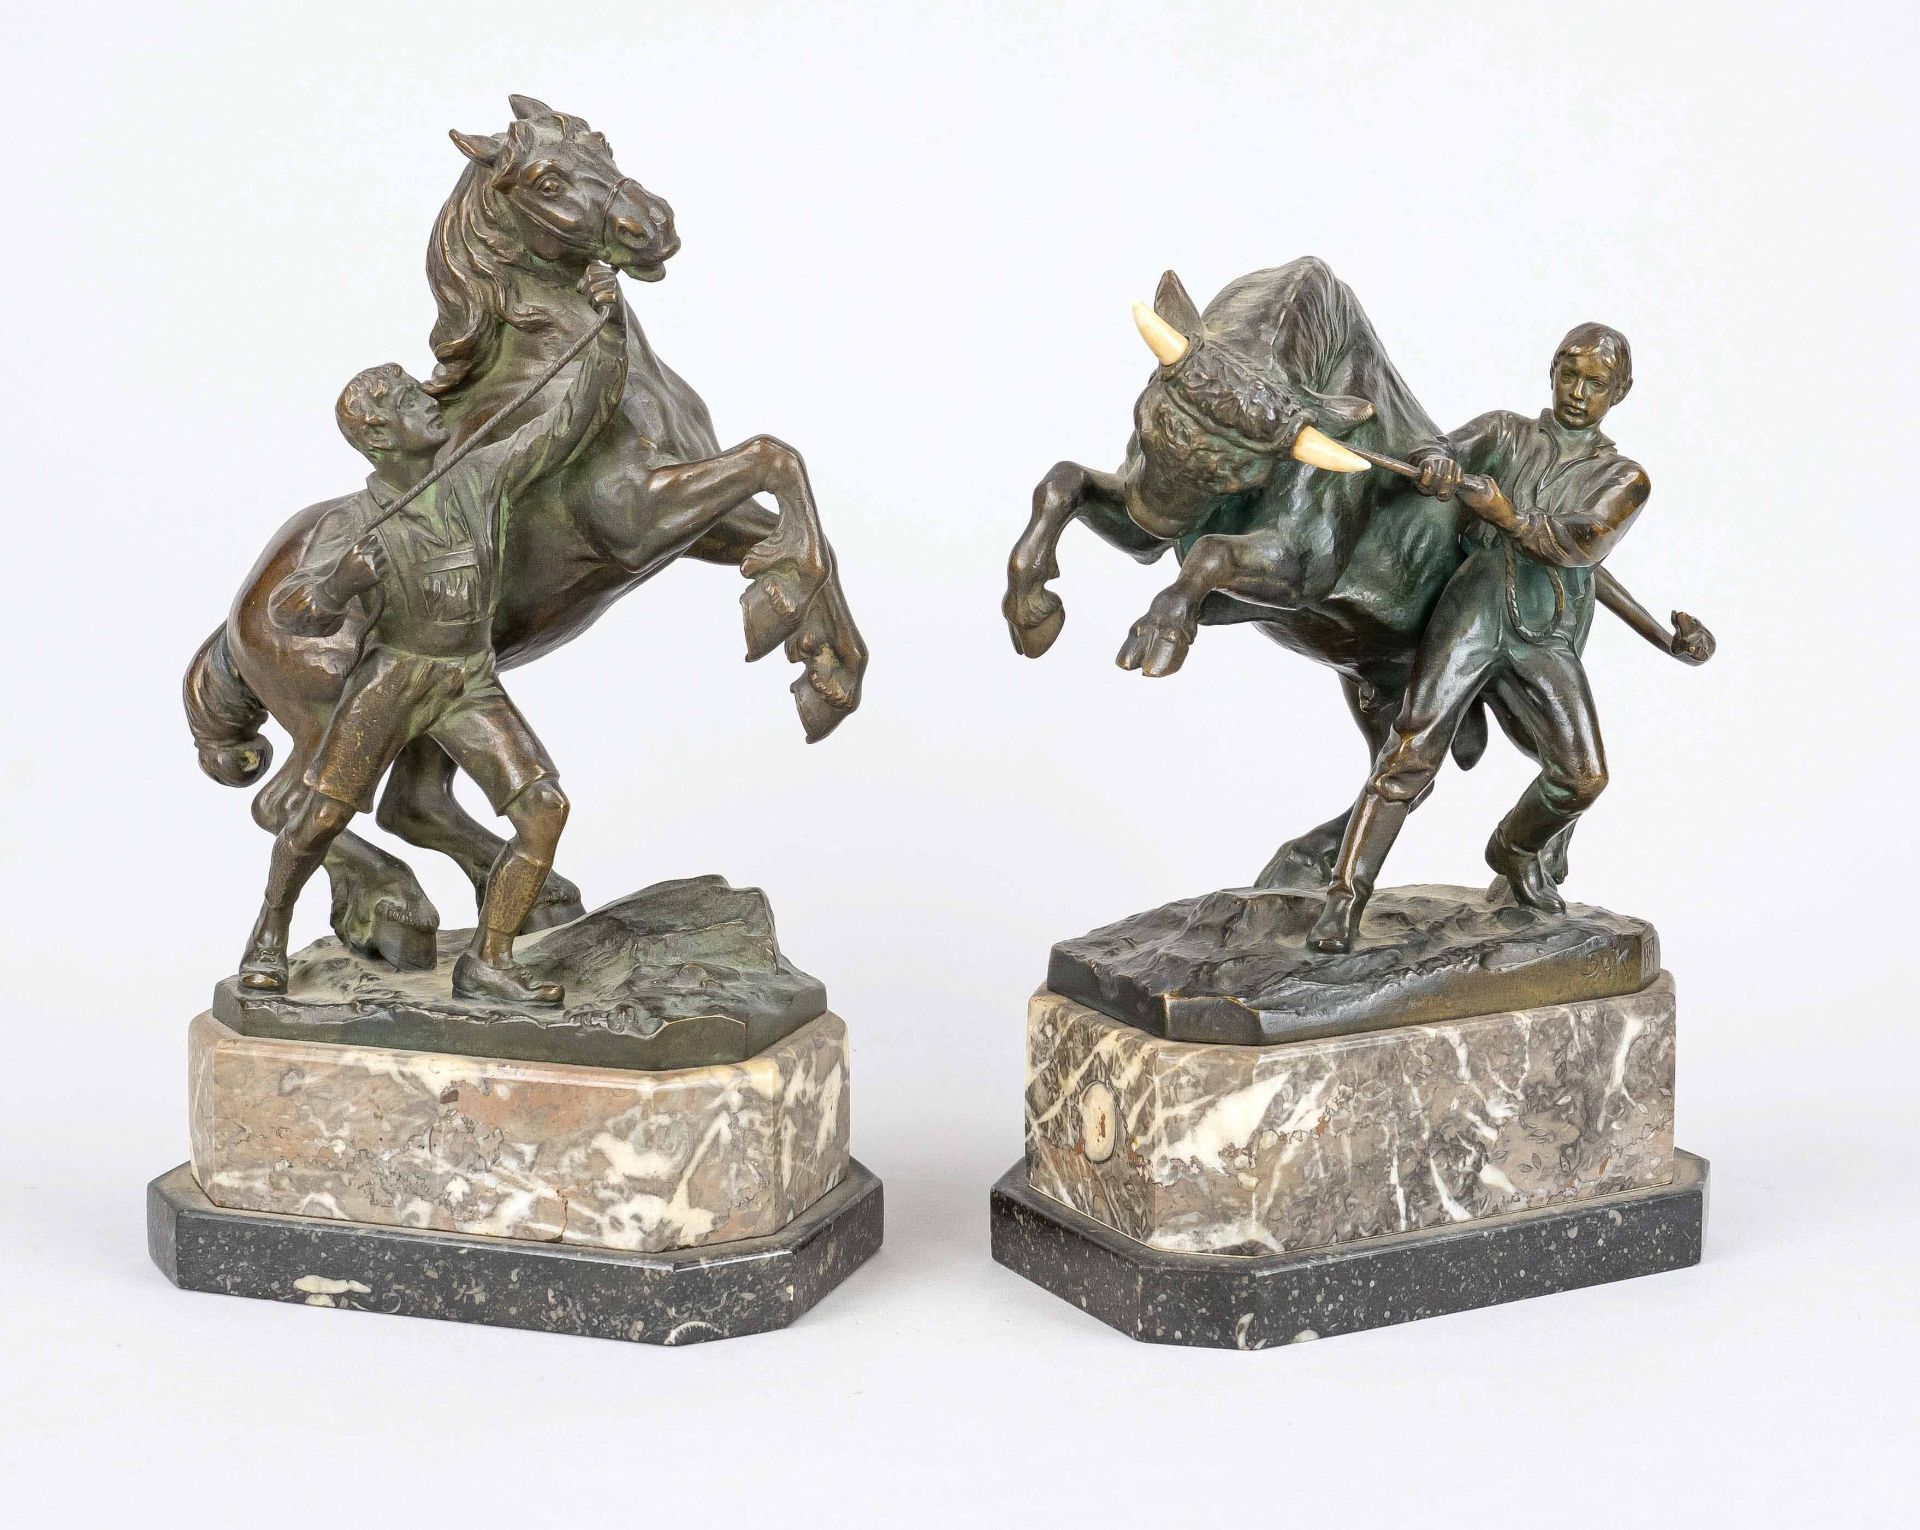 signed Syk, sculptor around 1900, horse and bull tamer, 2 dynamic figures in bronze with greenish